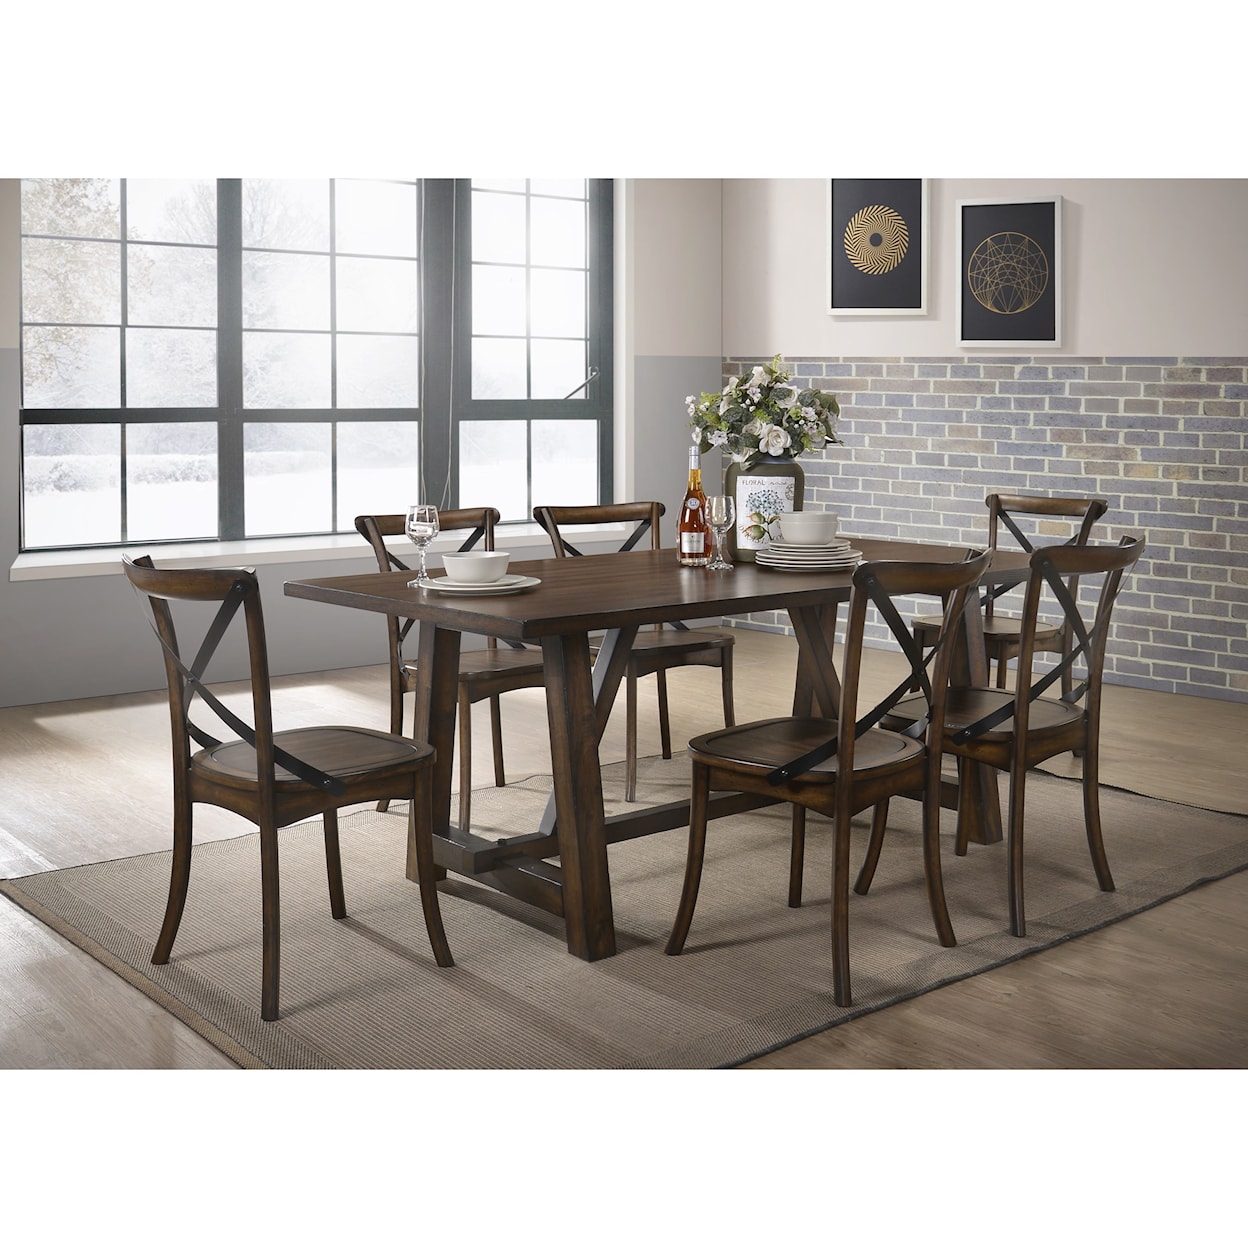 Acme Furniture Kaelyn Dining Table Set with 6 Chairs